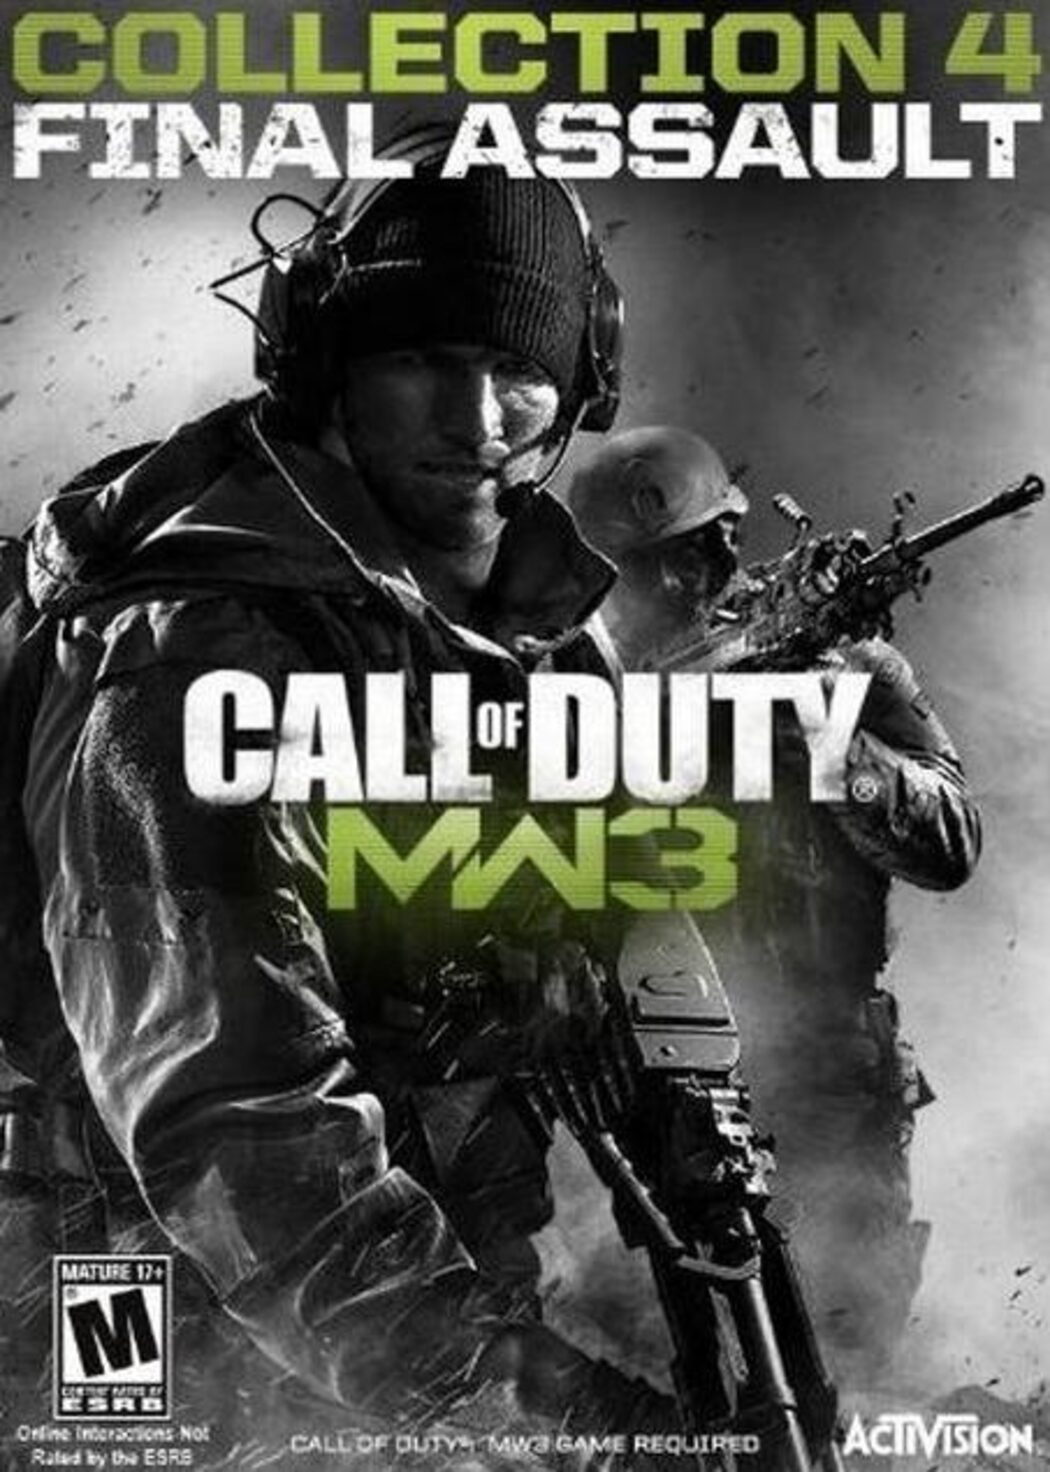 COD MW1, MW2, MW3 Complete Collection (PC GAME) - PC Download (No Online  Multiplayer/No REDEEM* Code) -, NO DVD NO CD